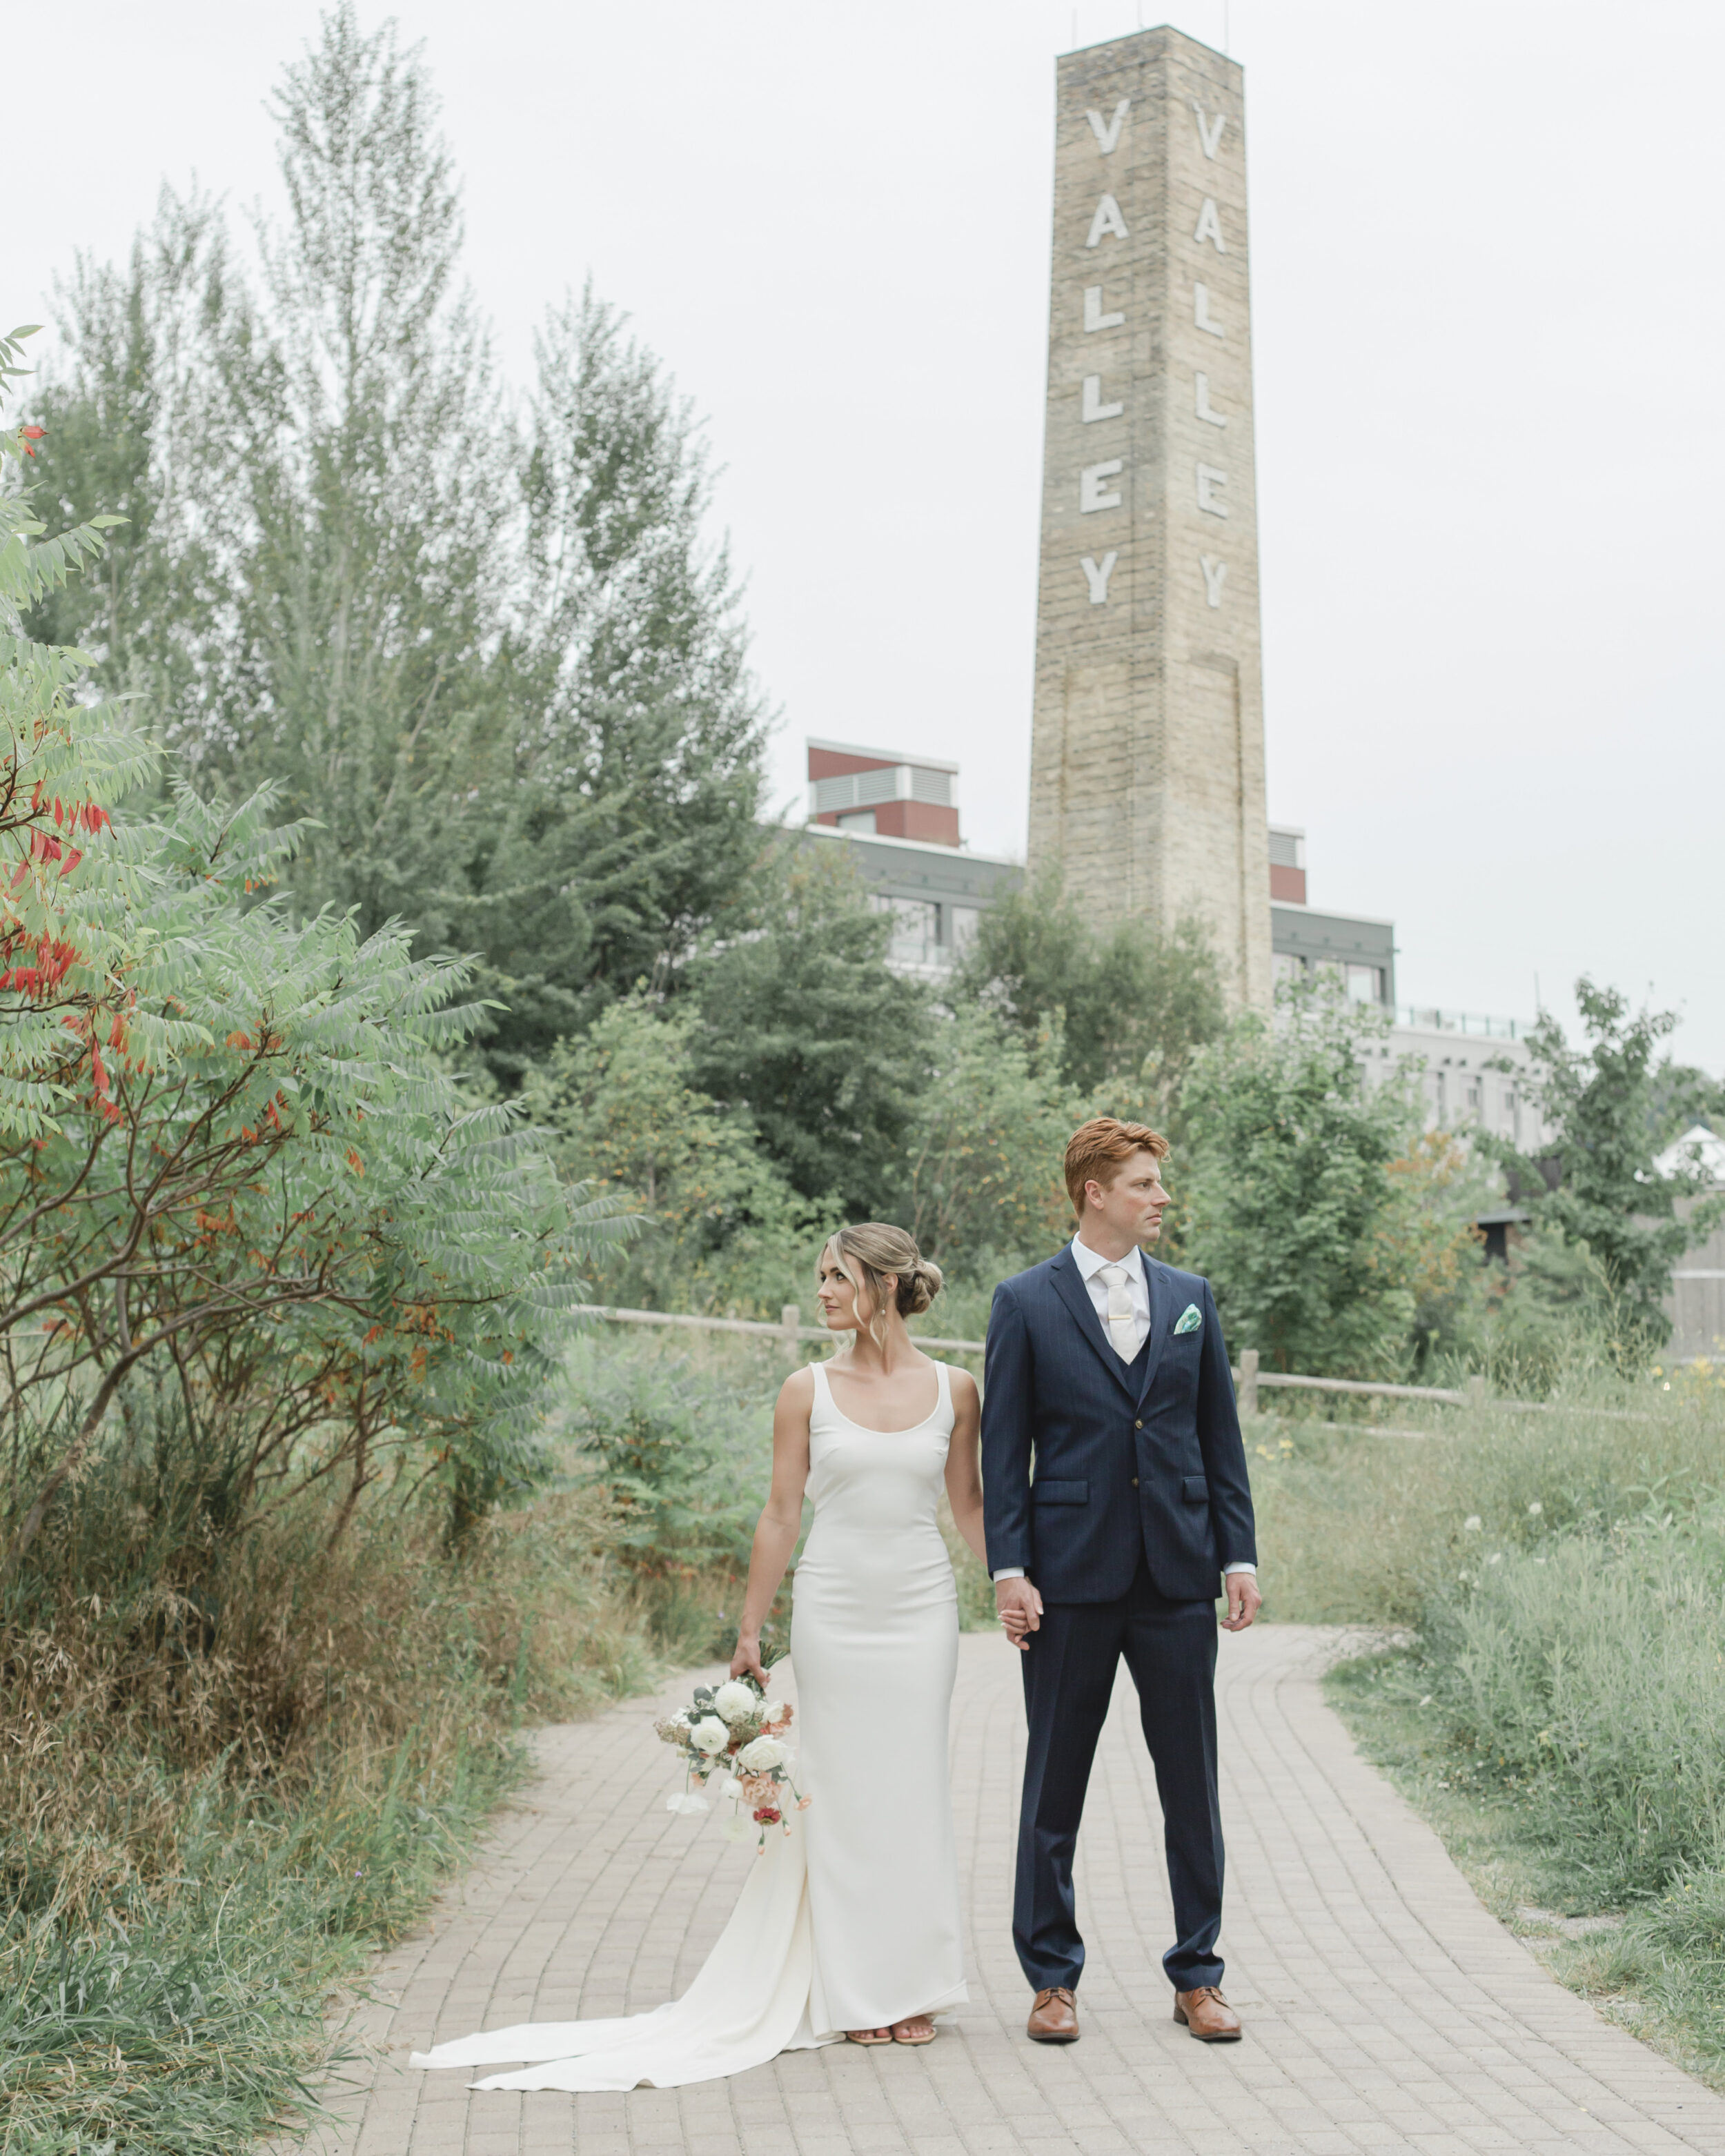 A couple eloping in Toronto at Evergreen Brickworks.